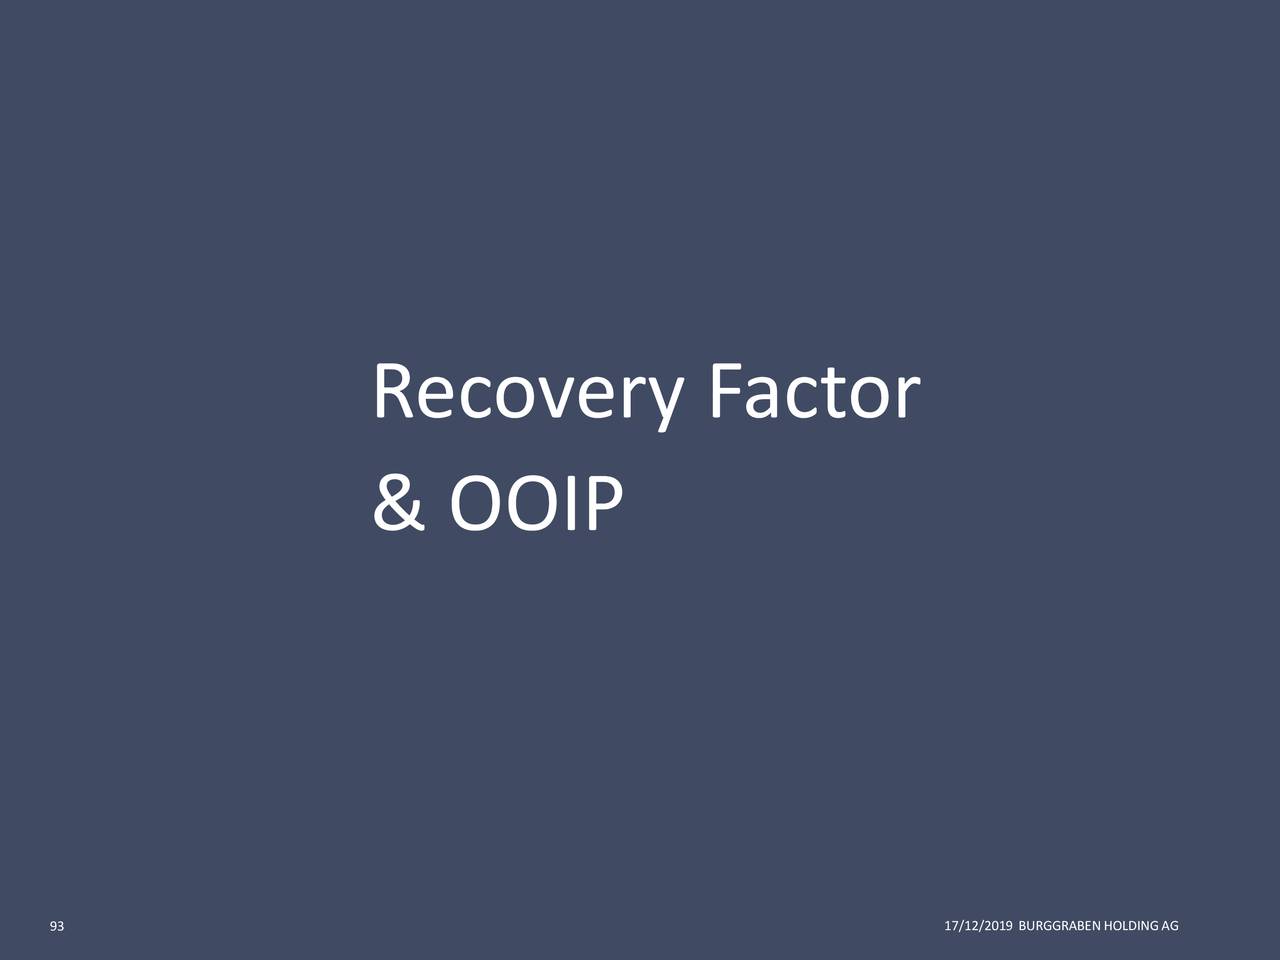 Recovery Factor